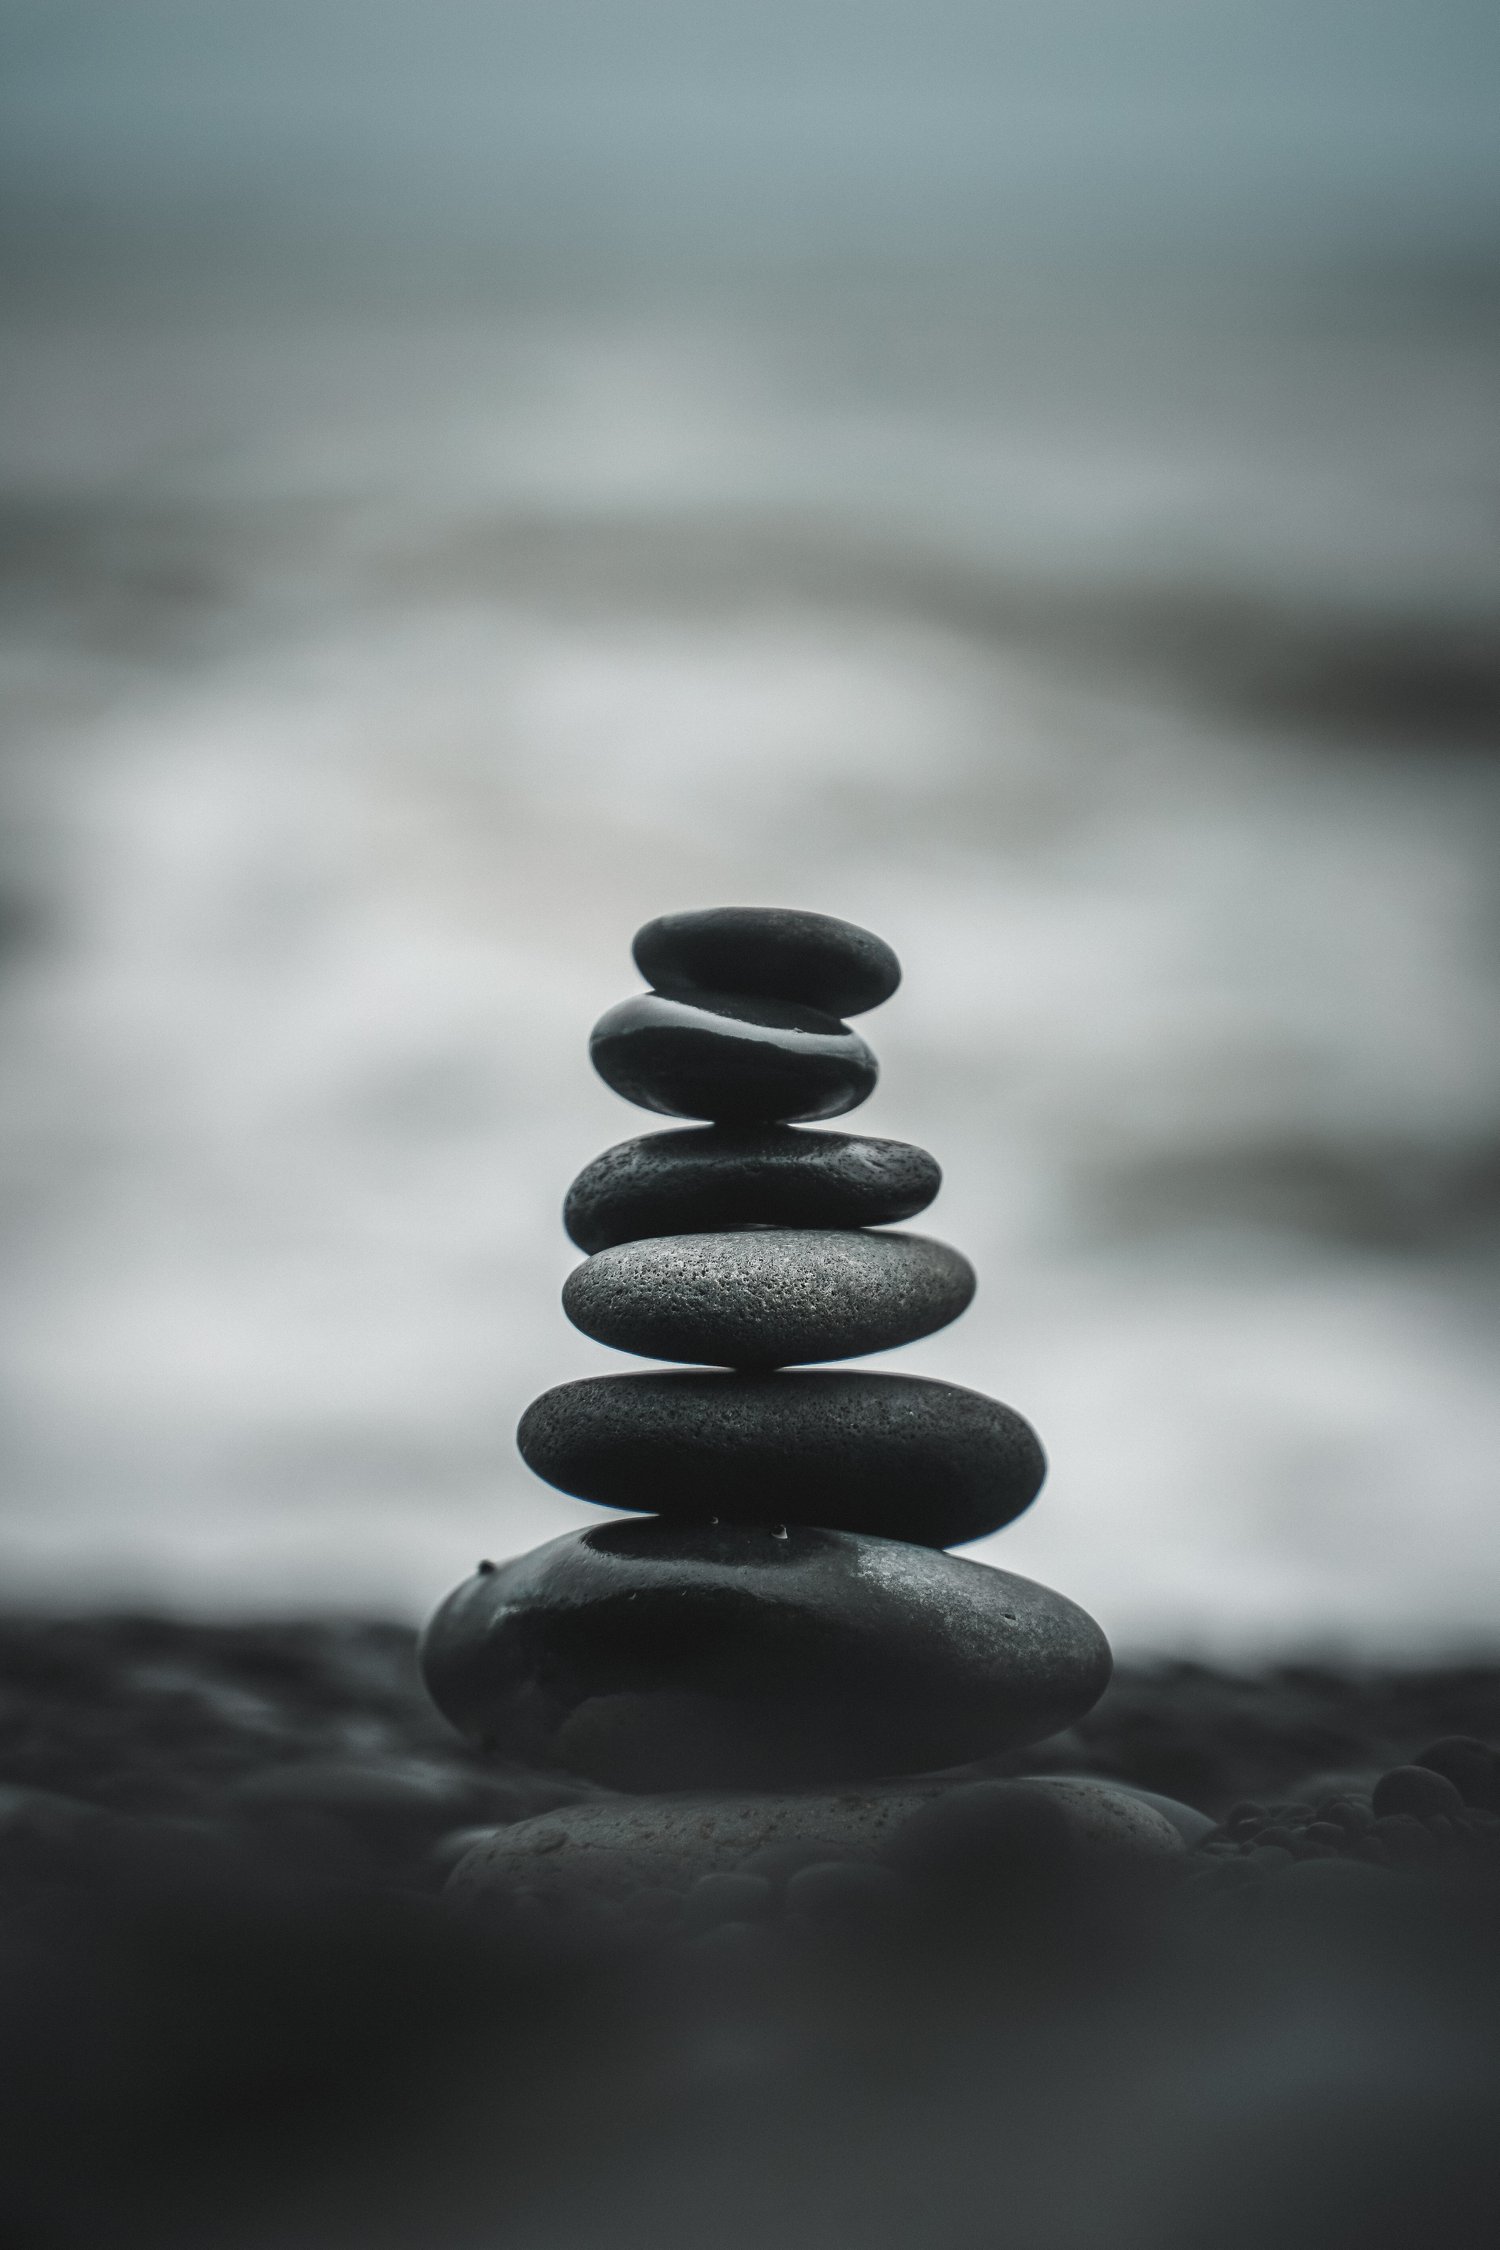 rocks stacked on each other to represent balance